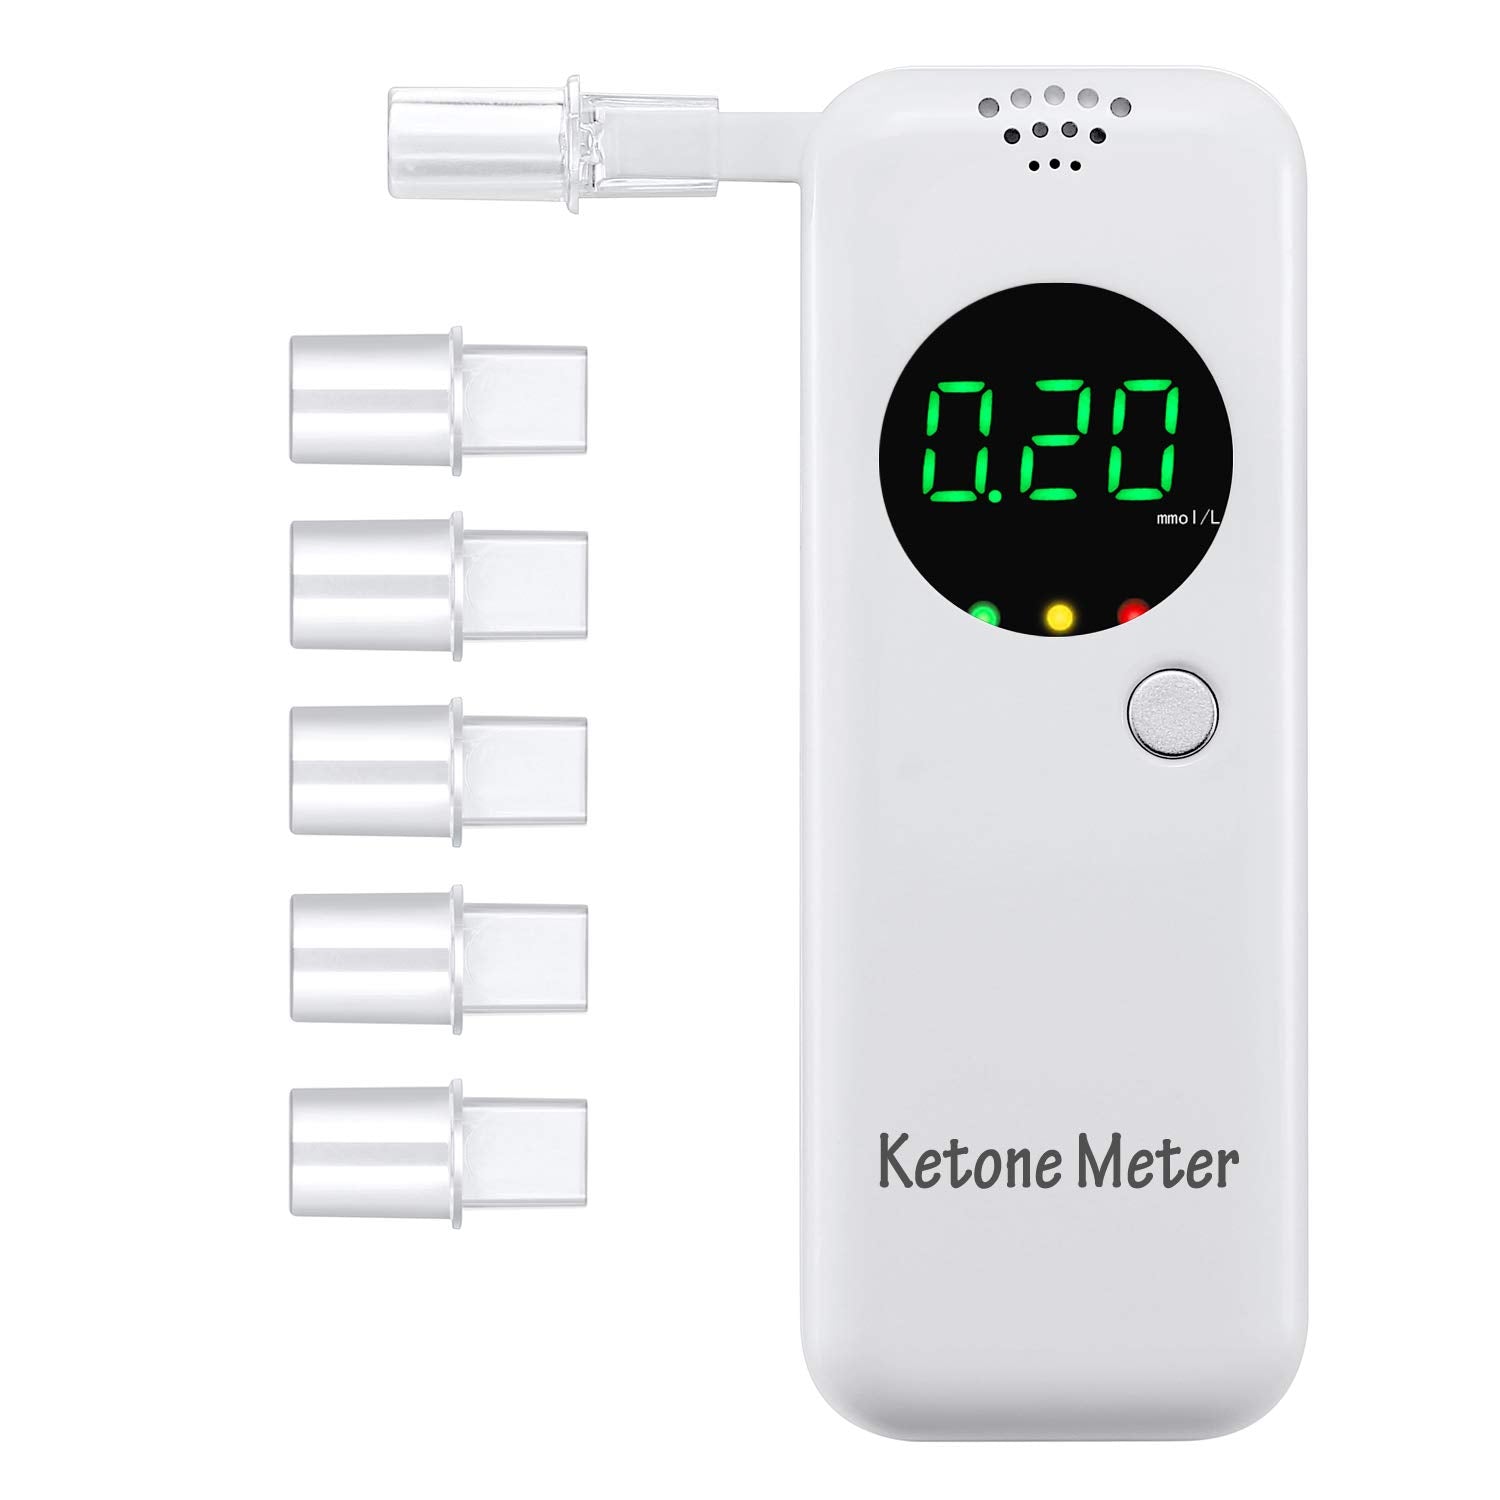 How to Use Ketone Breath Meter? Best Guide for Beginners